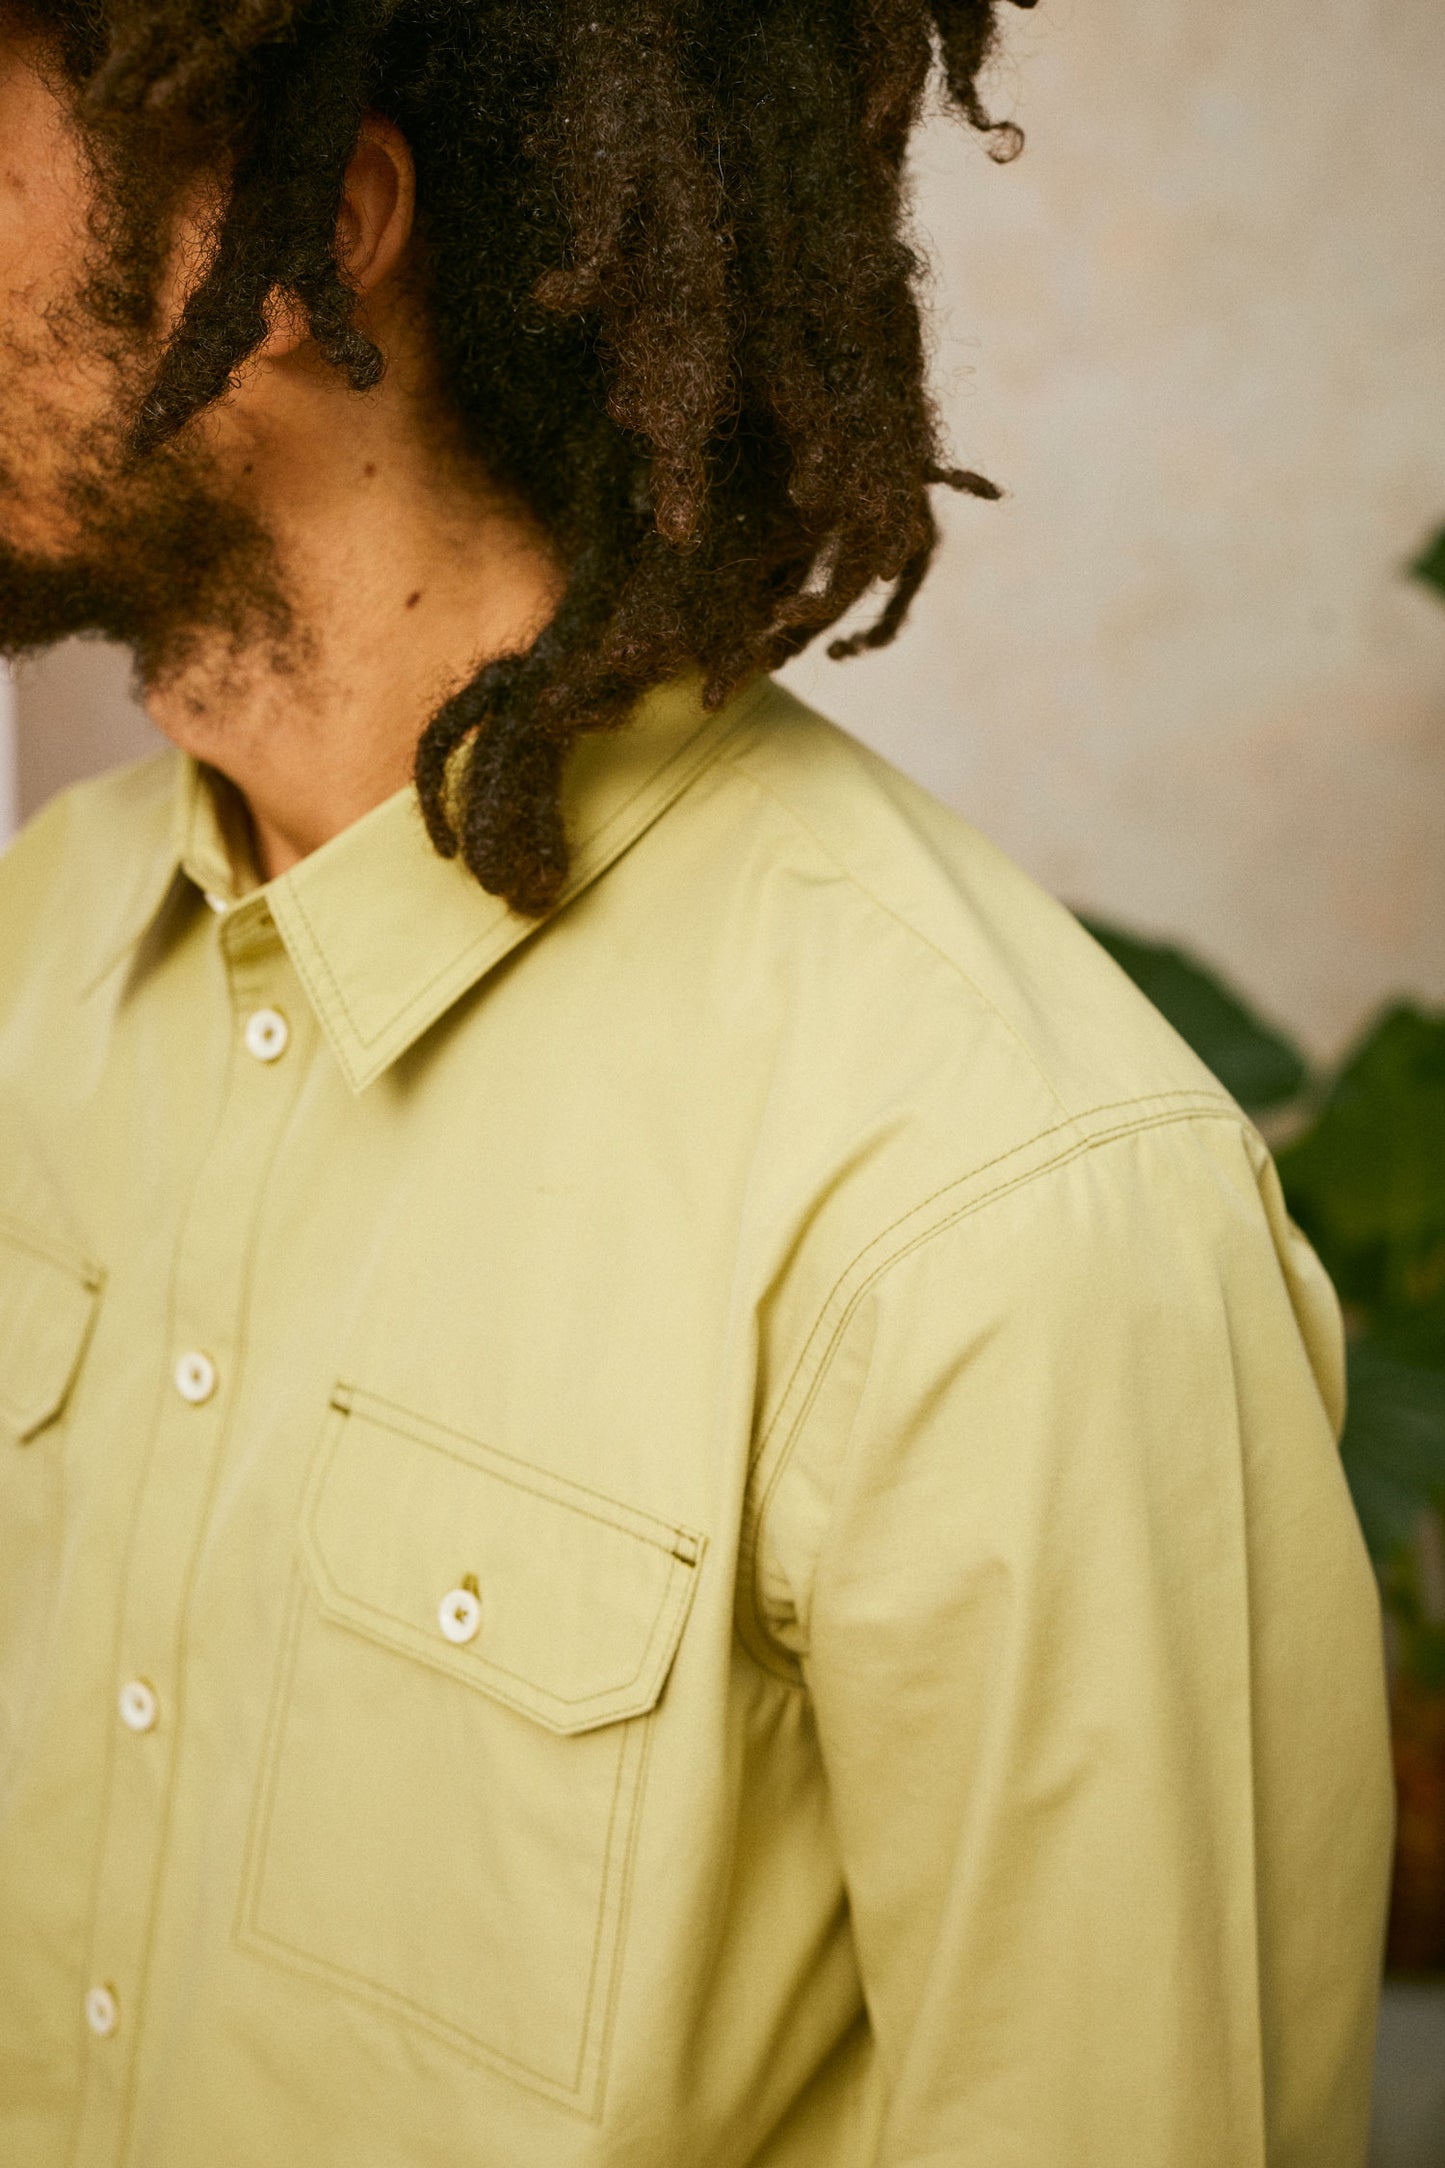 Close up of chest and shoulder; model wears Saywood's Eddy Mens Khaki Shirt. The images shows the utility pocket on the chest , collar and button placket. A plant can be seen in the background.